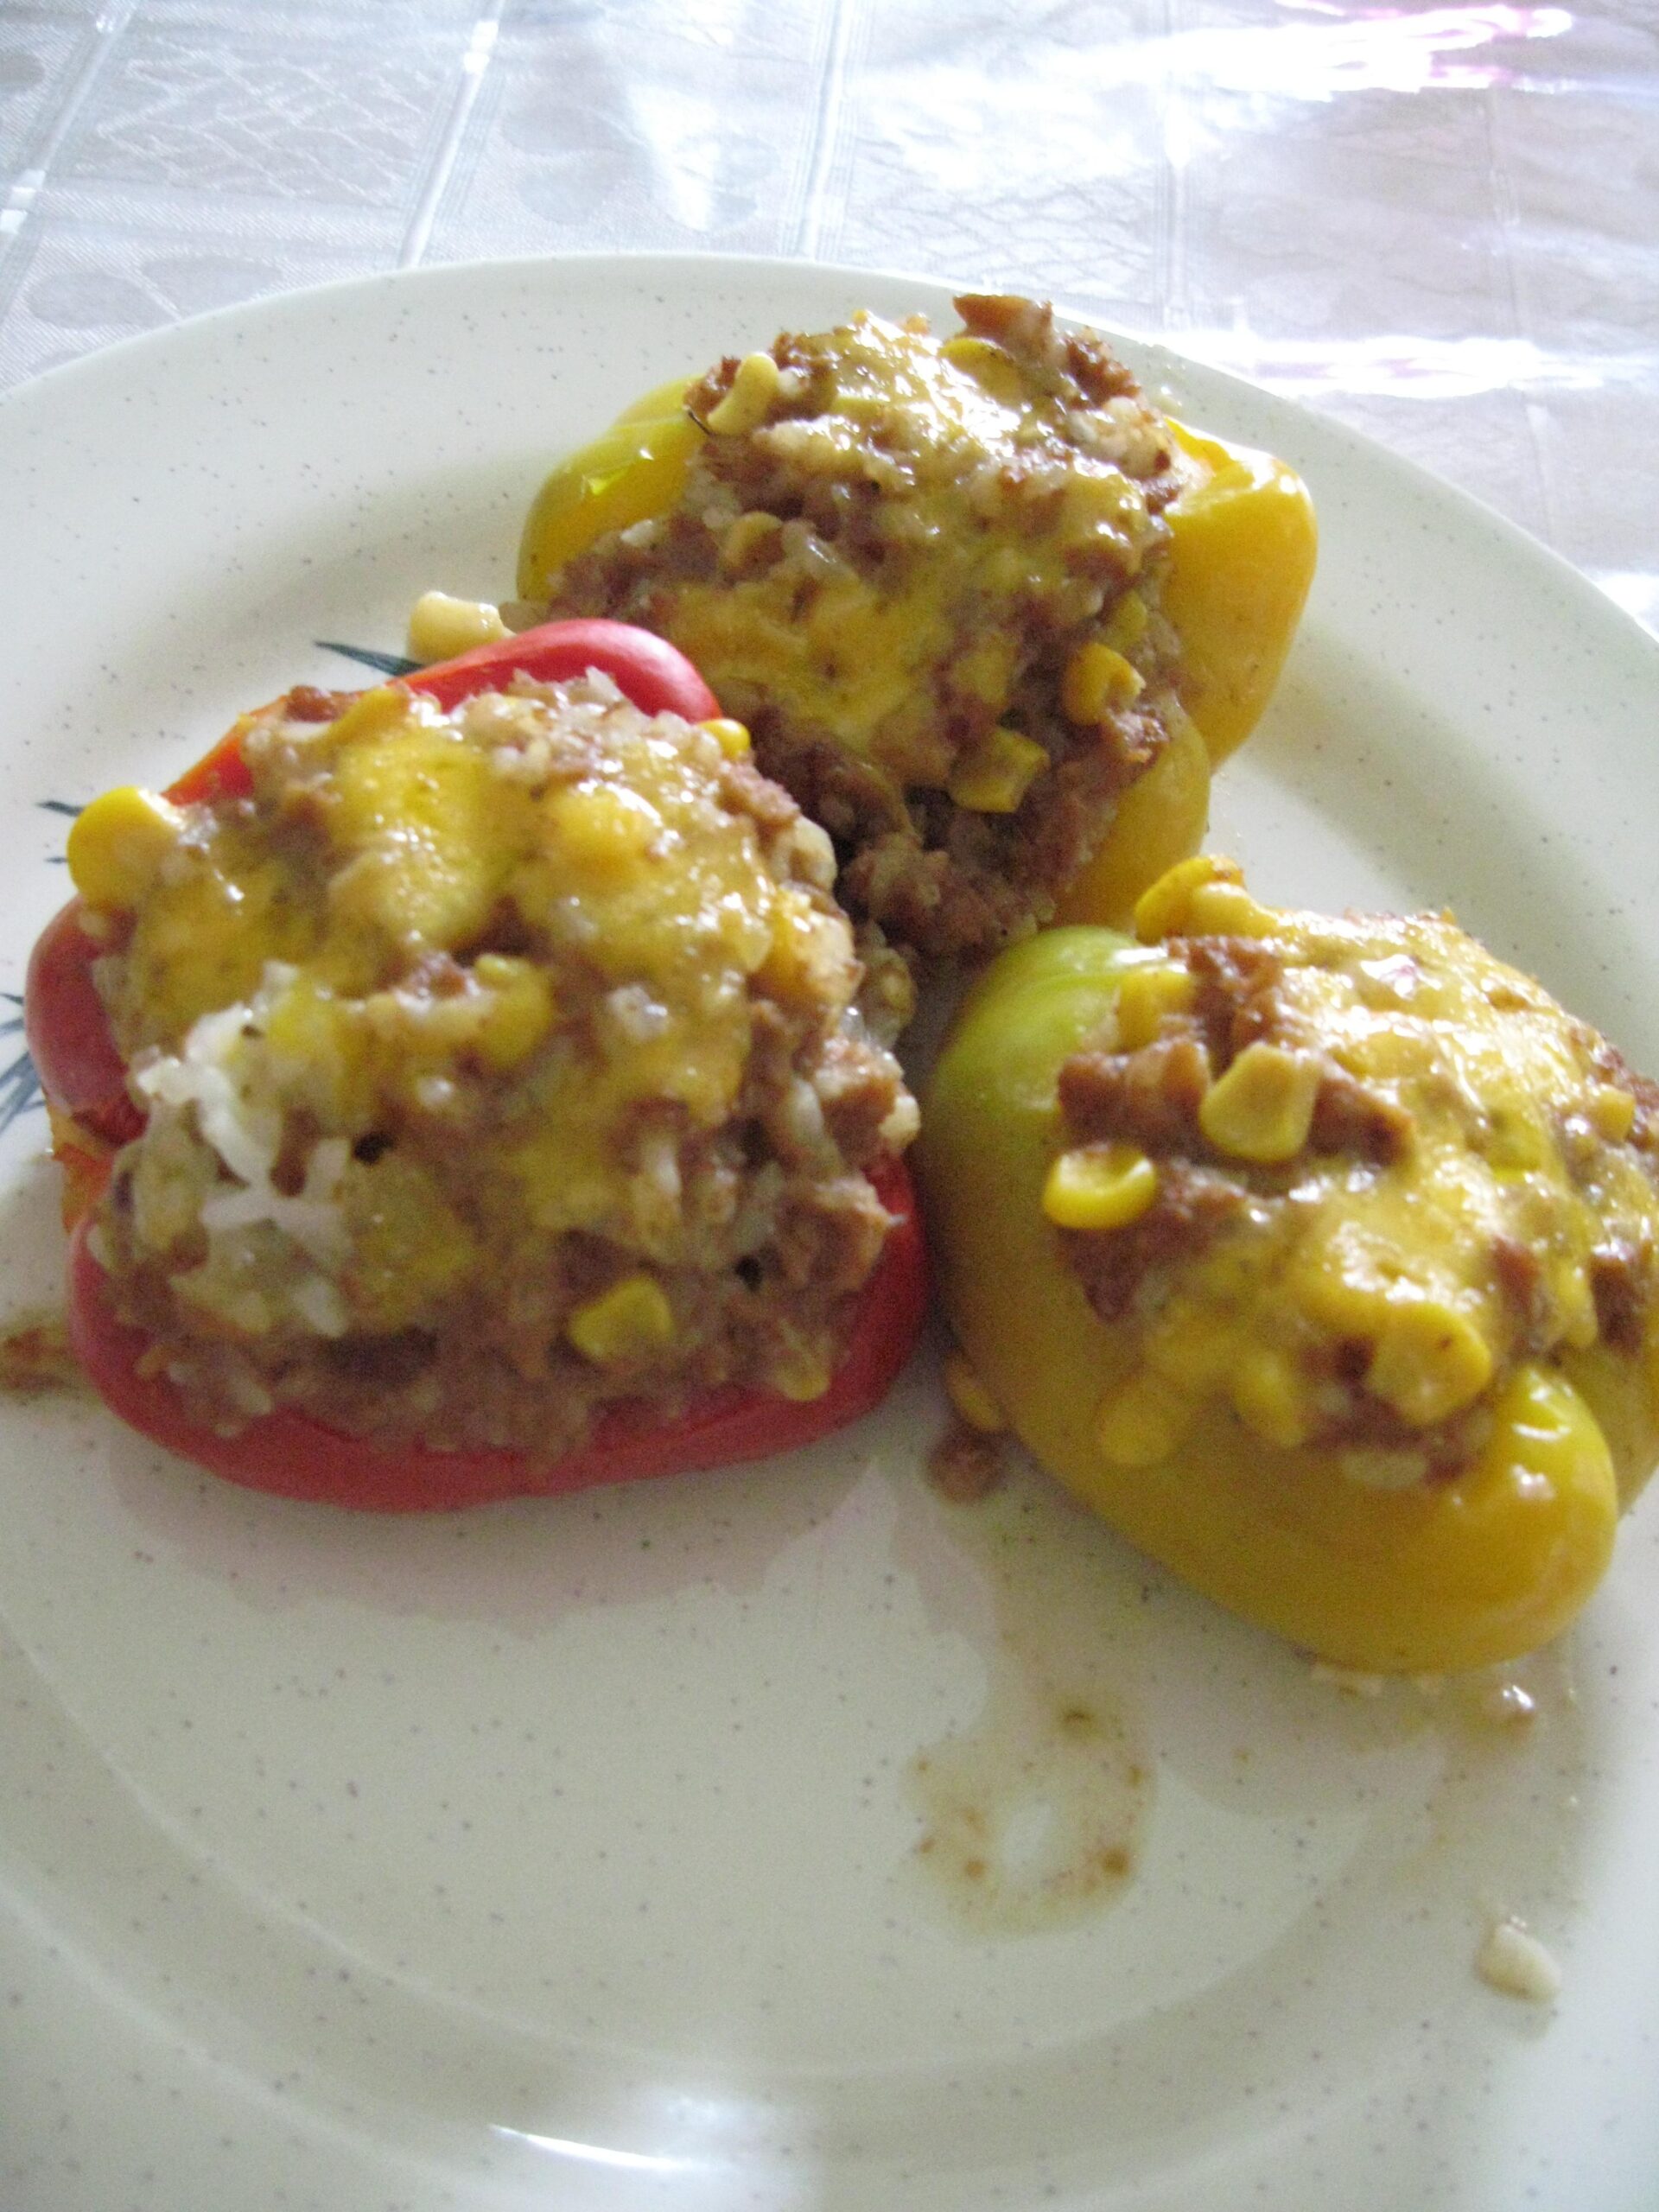  Bursting with flavor, these tri-color stuffed bell peppers are a feast for the eyes and the taste buds.